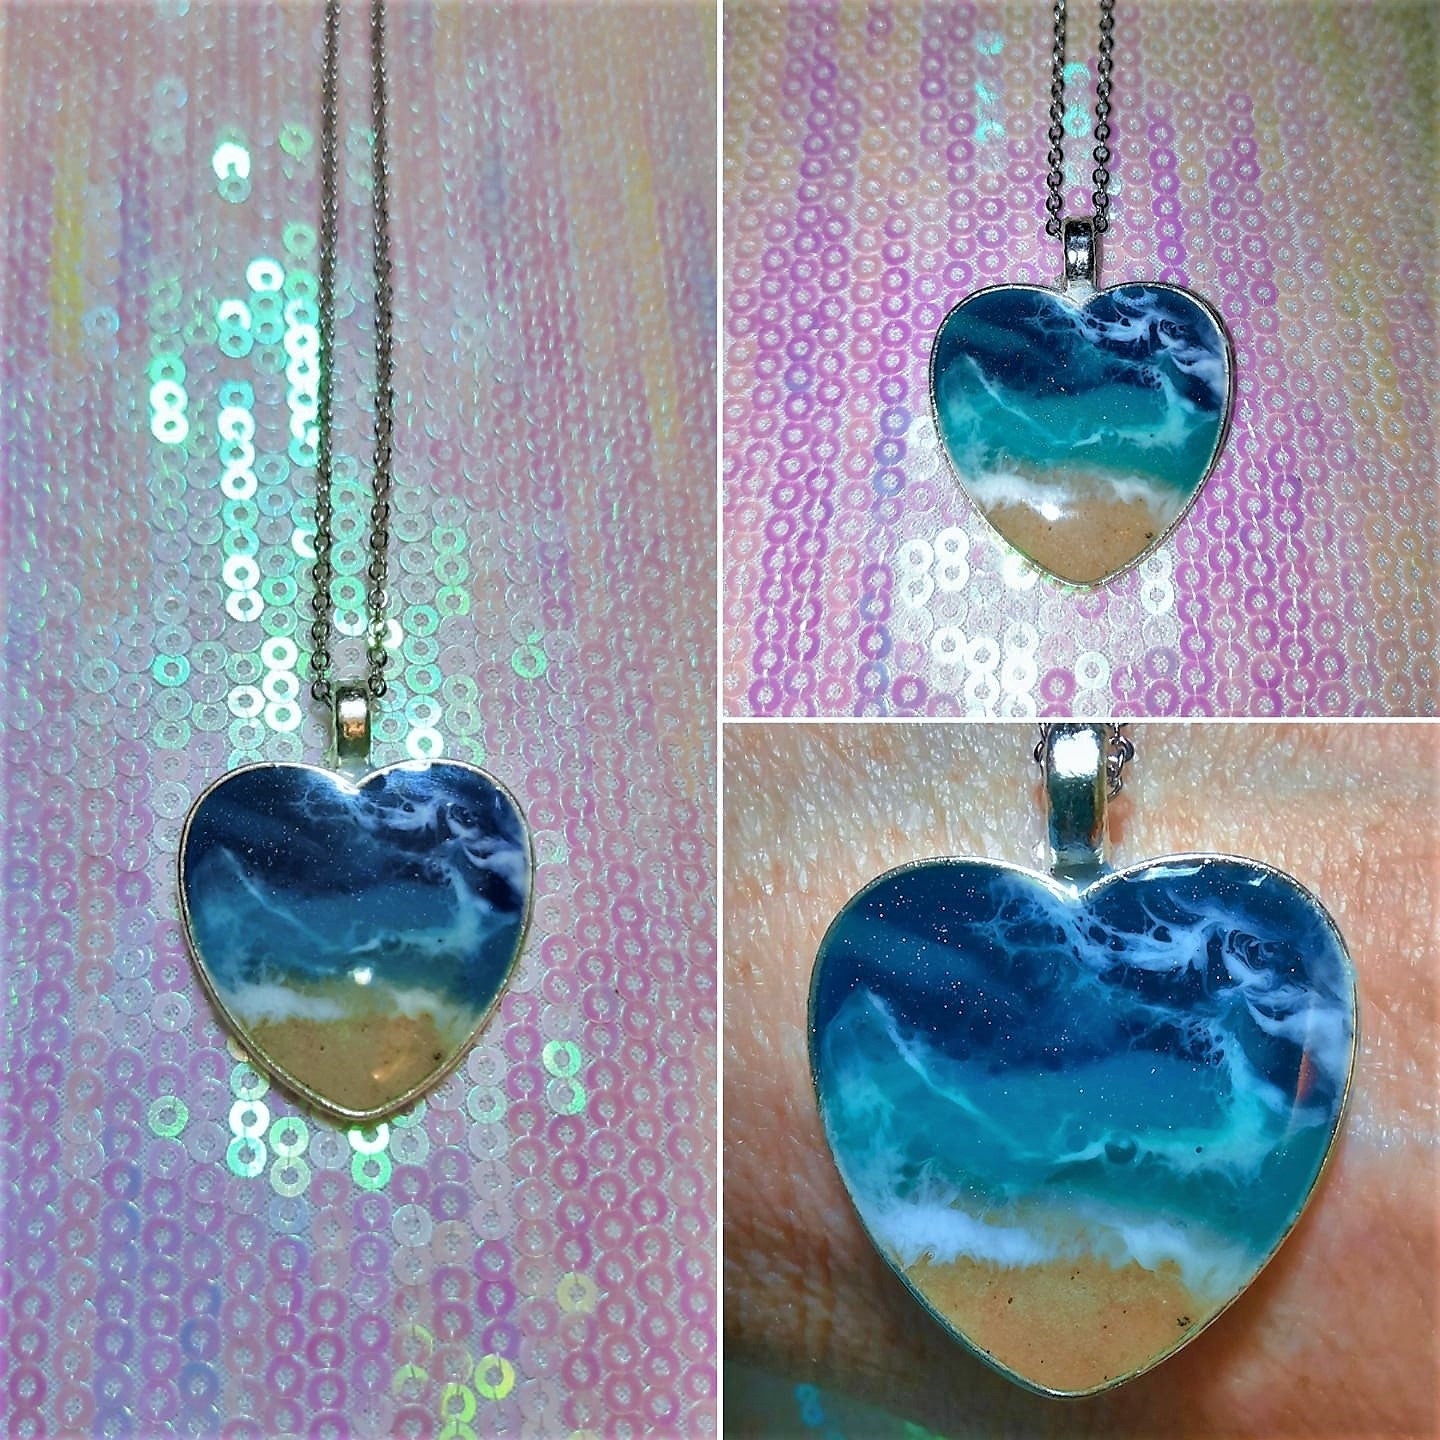 Heart Shaped Resin Waves / Ocean Pendant / Beach Scene Pendant Necklace Made with Resin and Real Sand - One of a Kind - Not a Photograph!